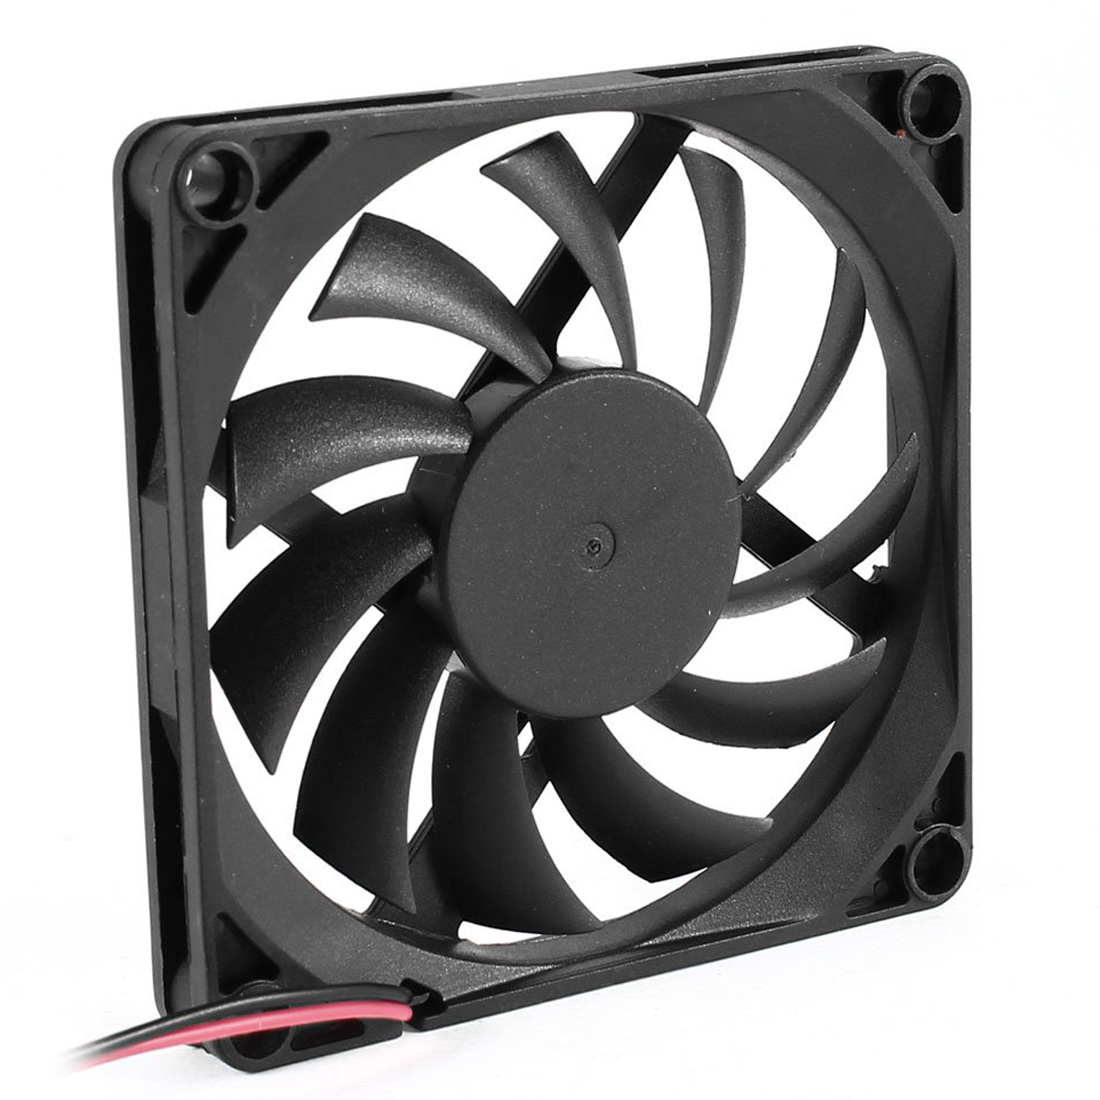 2pcs 120mm 120x25mm 4Pin DC 12V Brushless PC Computer Case Cooling Fan New Promotion